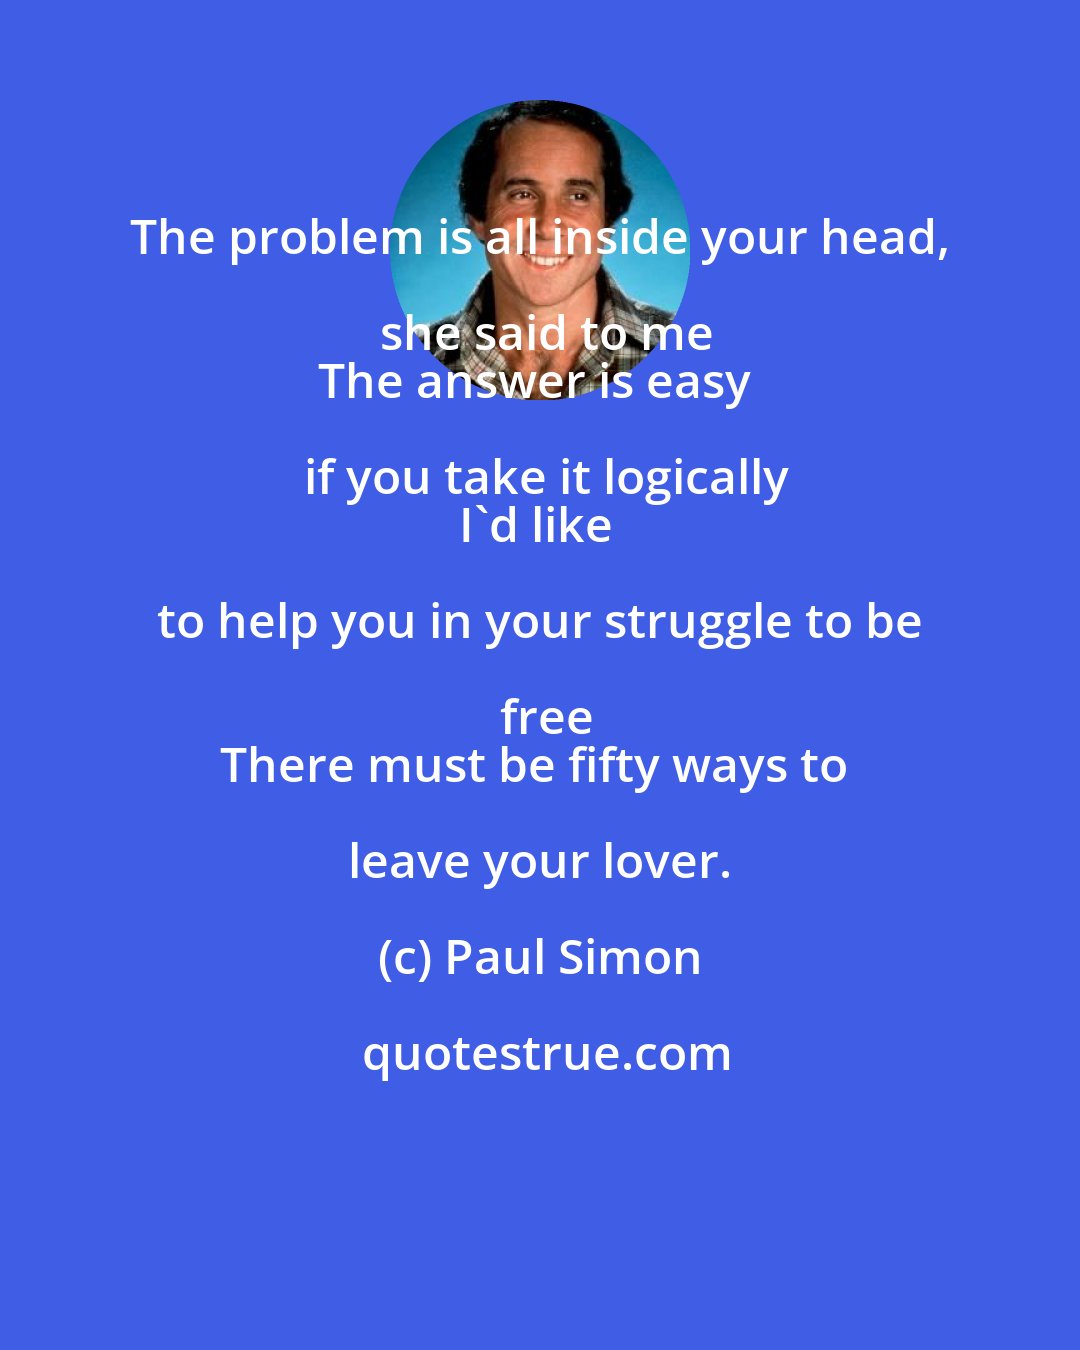 Paul Simon: The problem is all inside your head, she said to me
The answer is easy if you take it logically
I'd like to help you in your struggle to be free
There must be fifty ways to leave your lover.